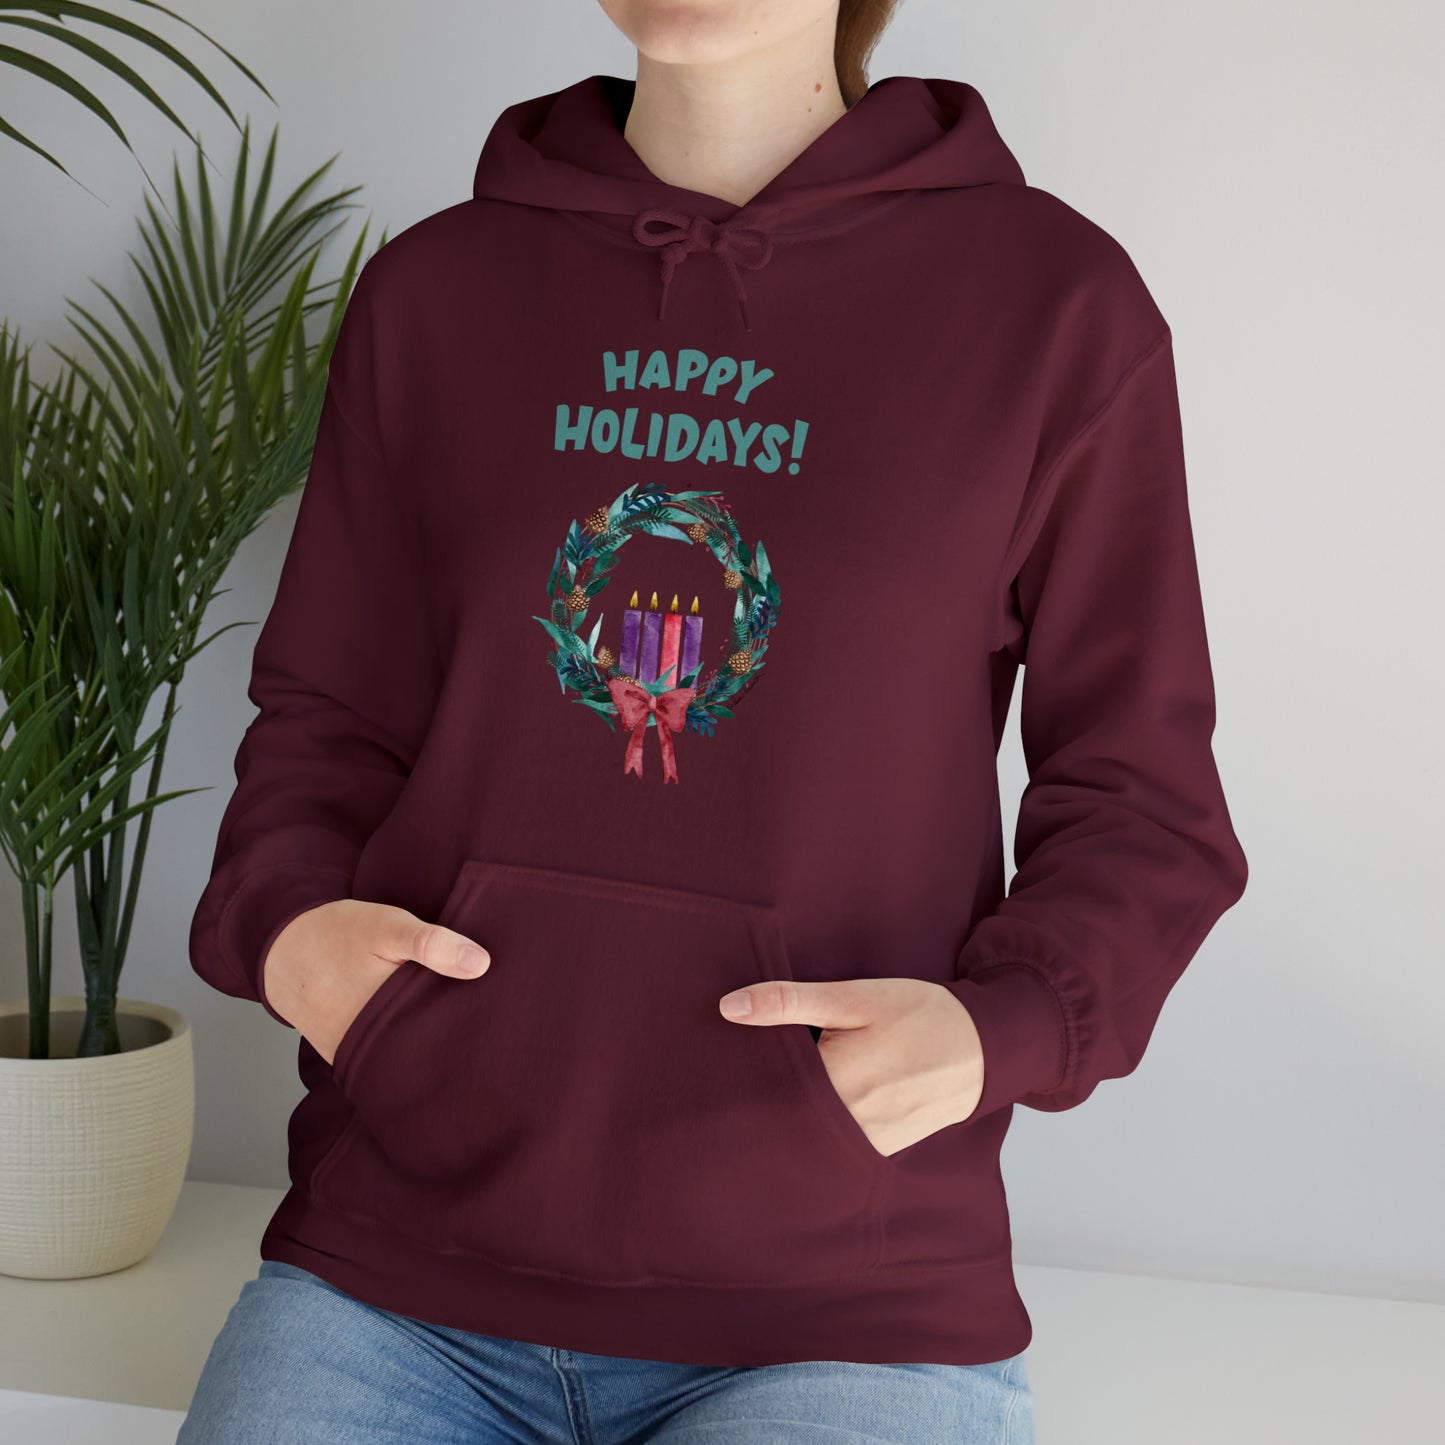 Mock up of a woman sitting down and wearing the Maroon shirt